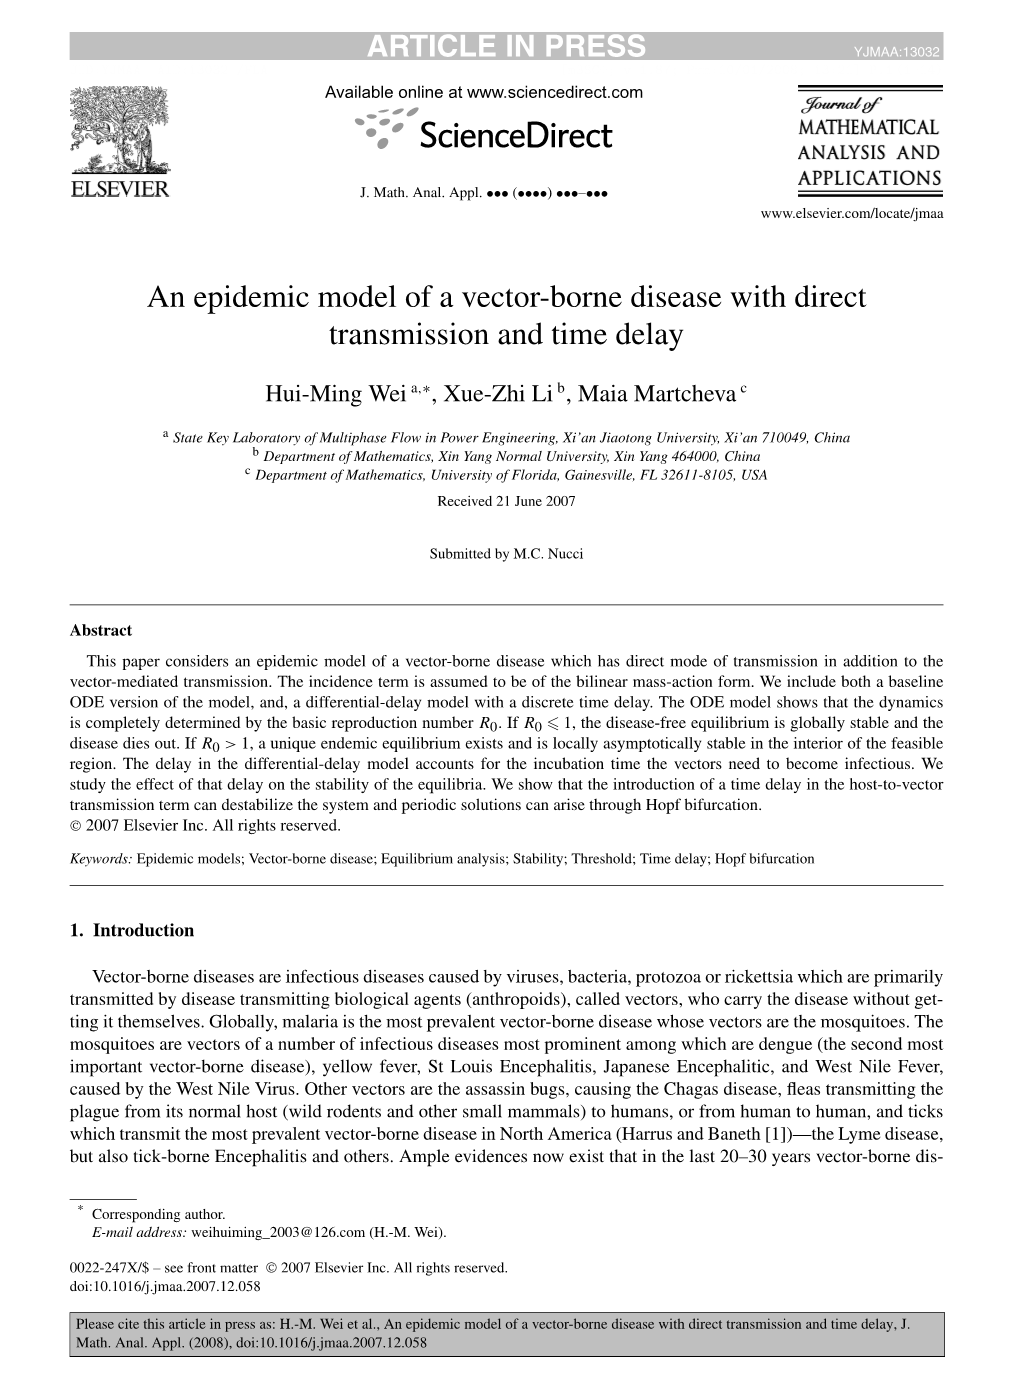 An Epidemic Model of a Vector-Borne Disease with Direct Transmission and Time Delay